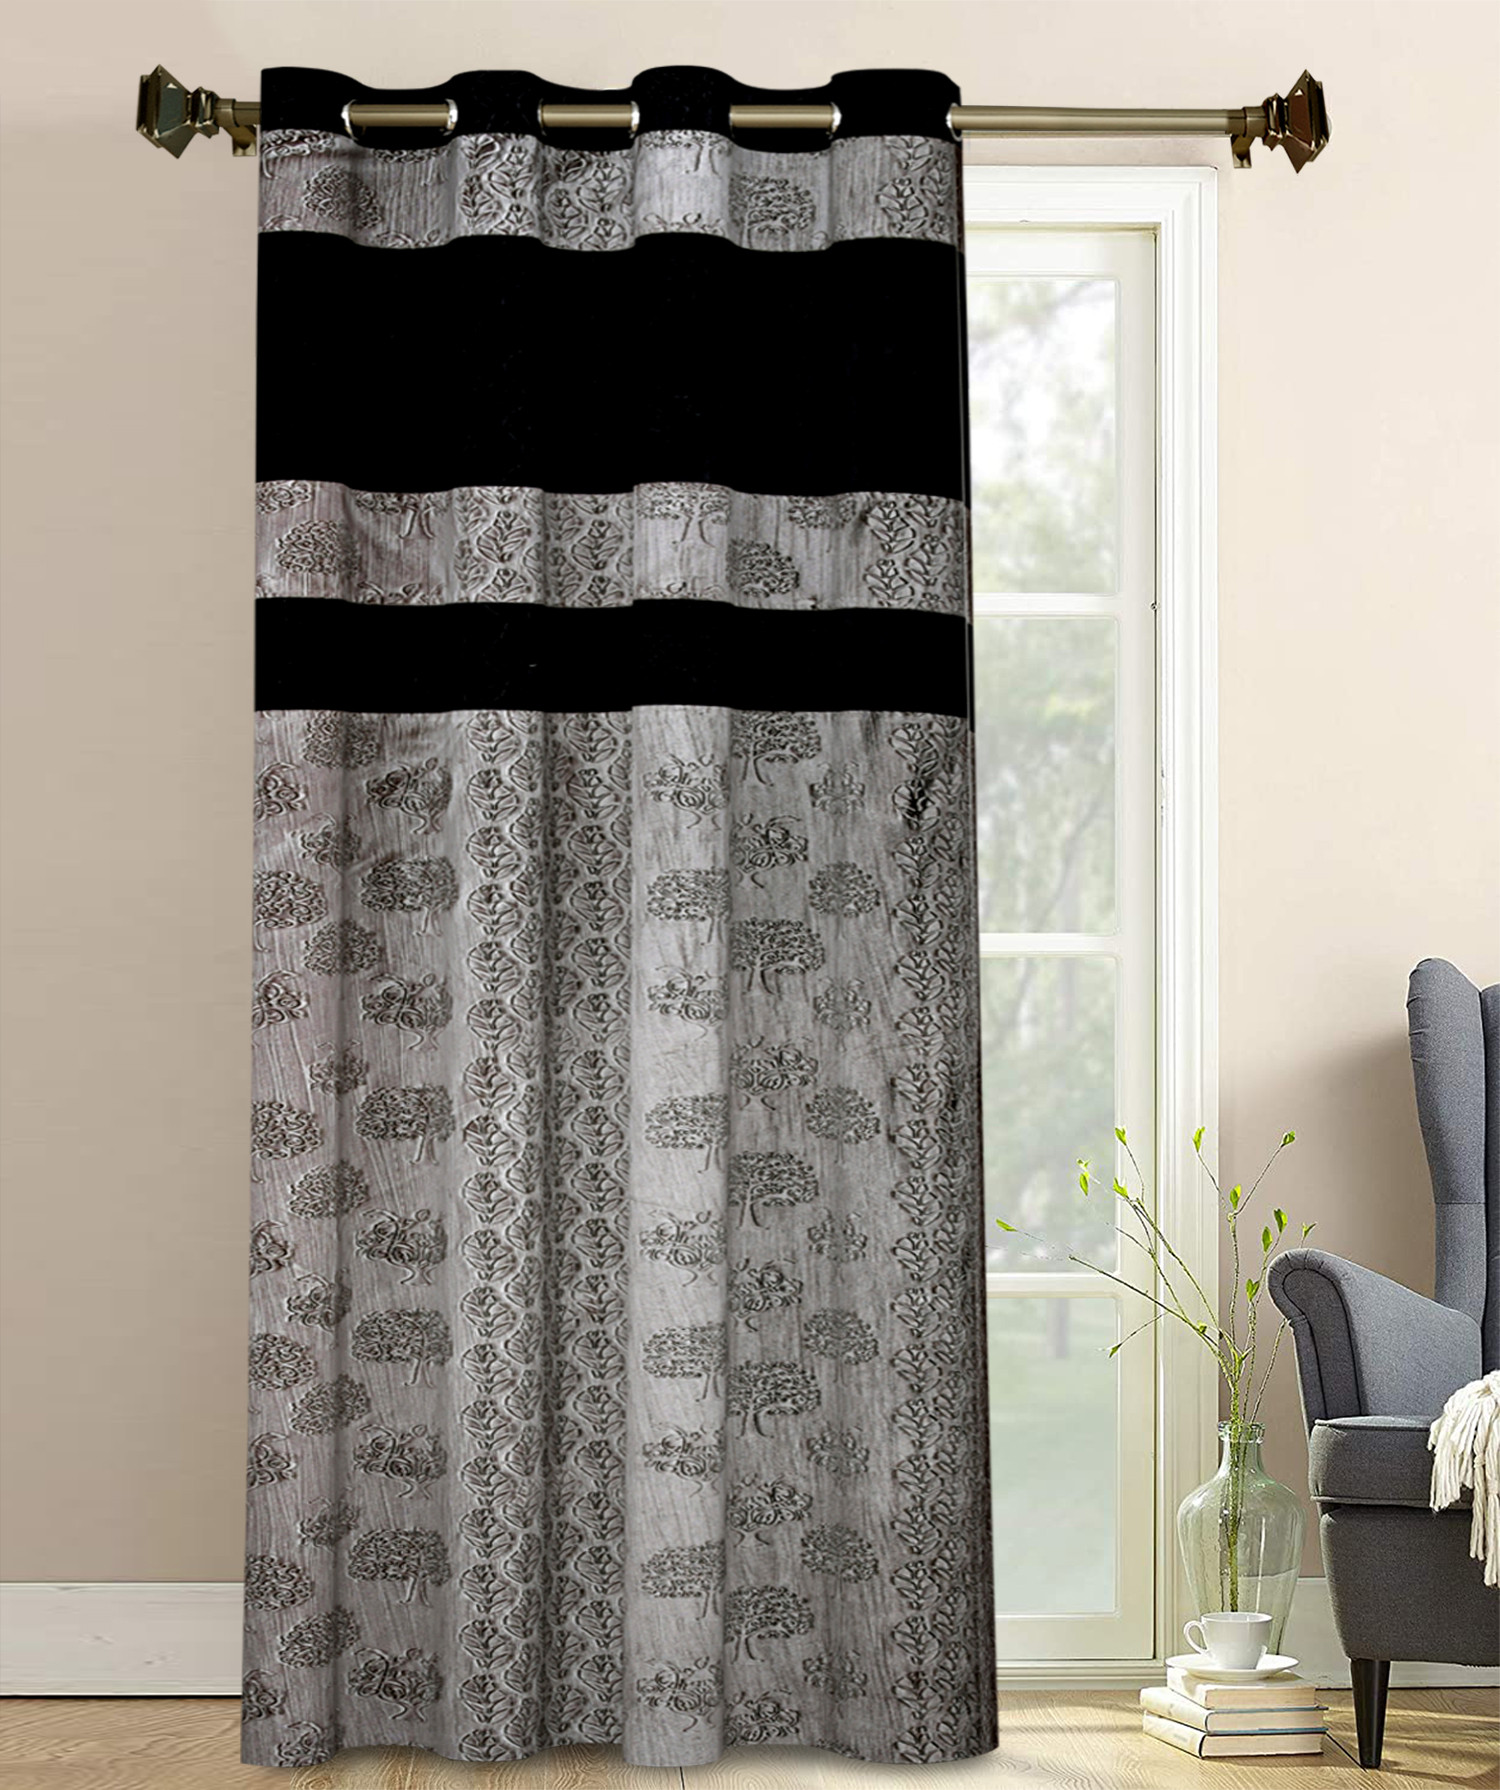 Kuber Industries Forest Printed 7 Feet Door Curtain For Living Room, Bed Room, Kids Room With 8 Eyelet (Black & Grey)-HS43KUBMART25609